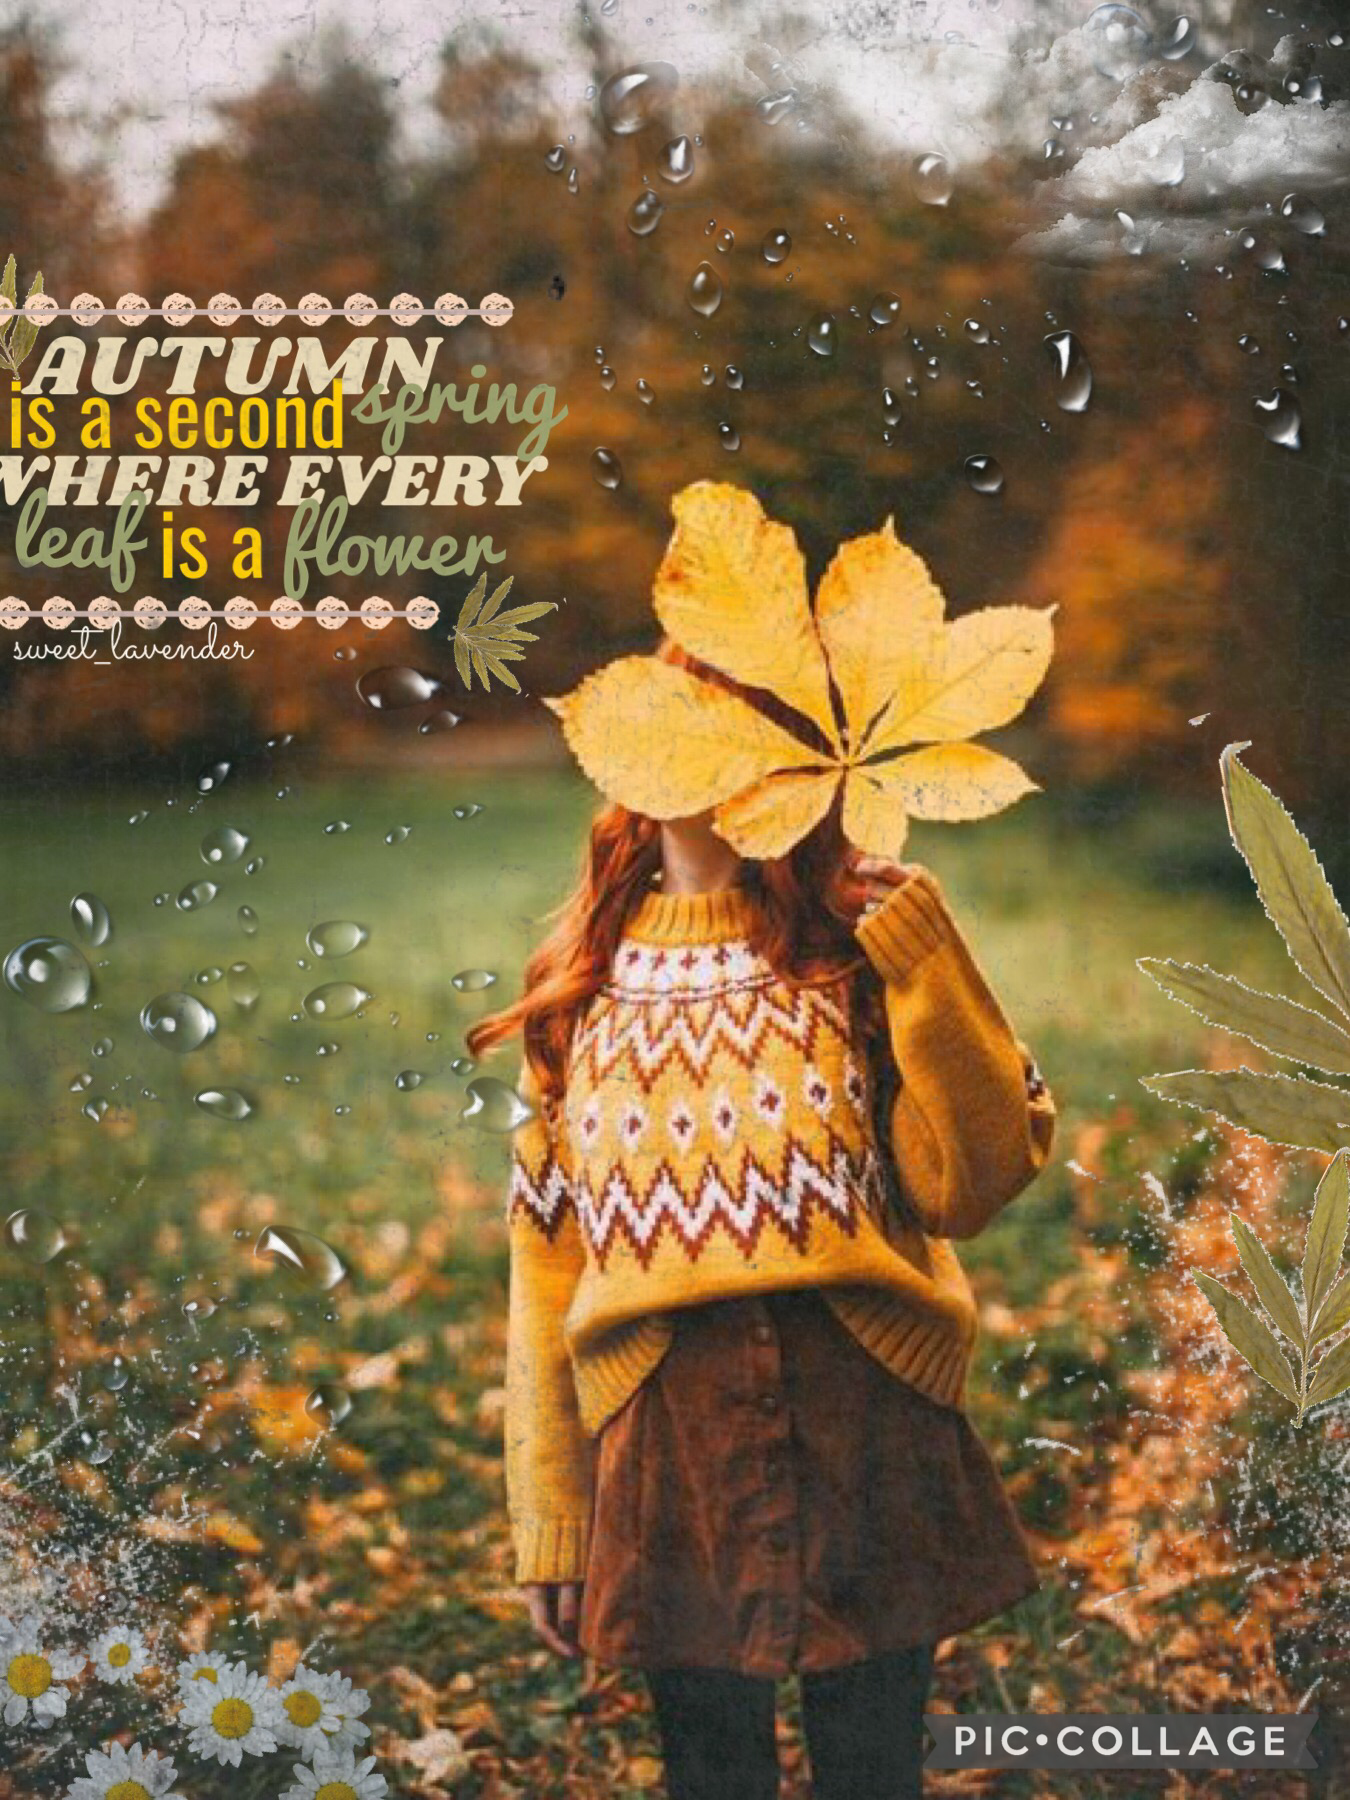 🍁09-24-21🍁 tap for caption pls…
Heyyy!! Here is another autumn collage!:))
Entry for mini_mushie ‘s contest! Go enter too!
Qotd: do you ever read my captions? Lol
